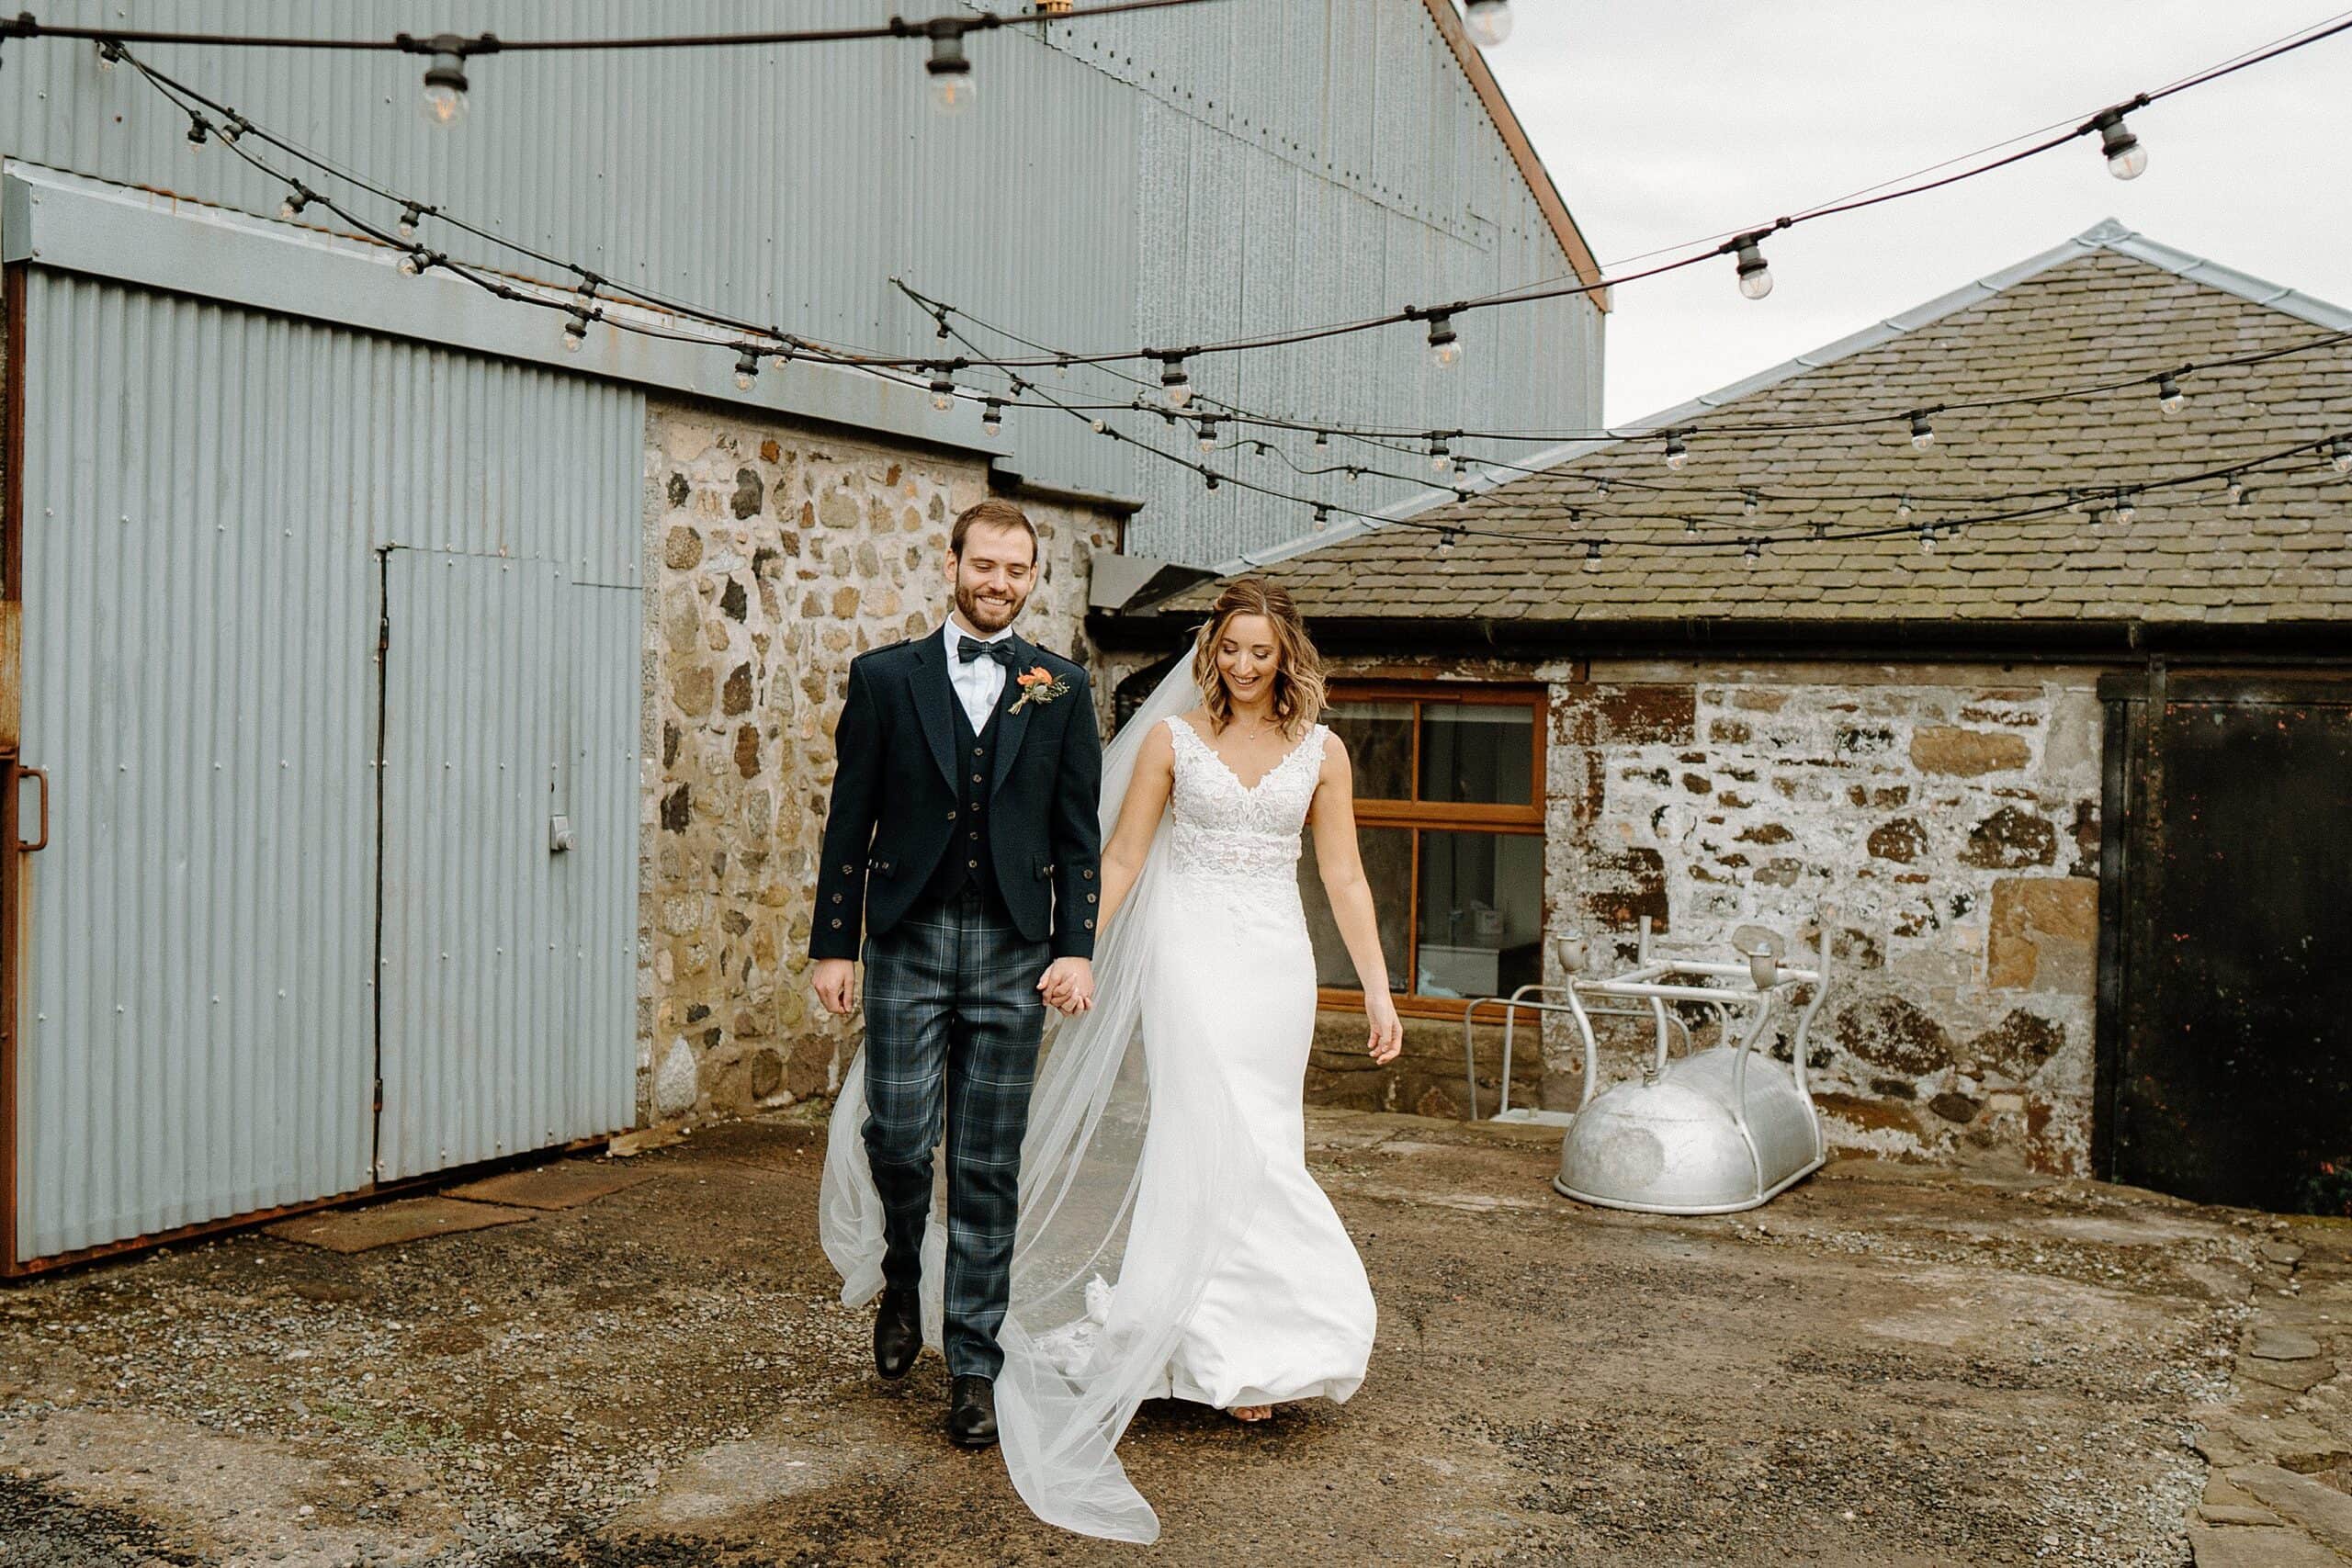 outside exterior view of harelaw farm wedding barn venue fenwick scotland showing bride and groom smiling in front of grey barn door and beneath festoon lights